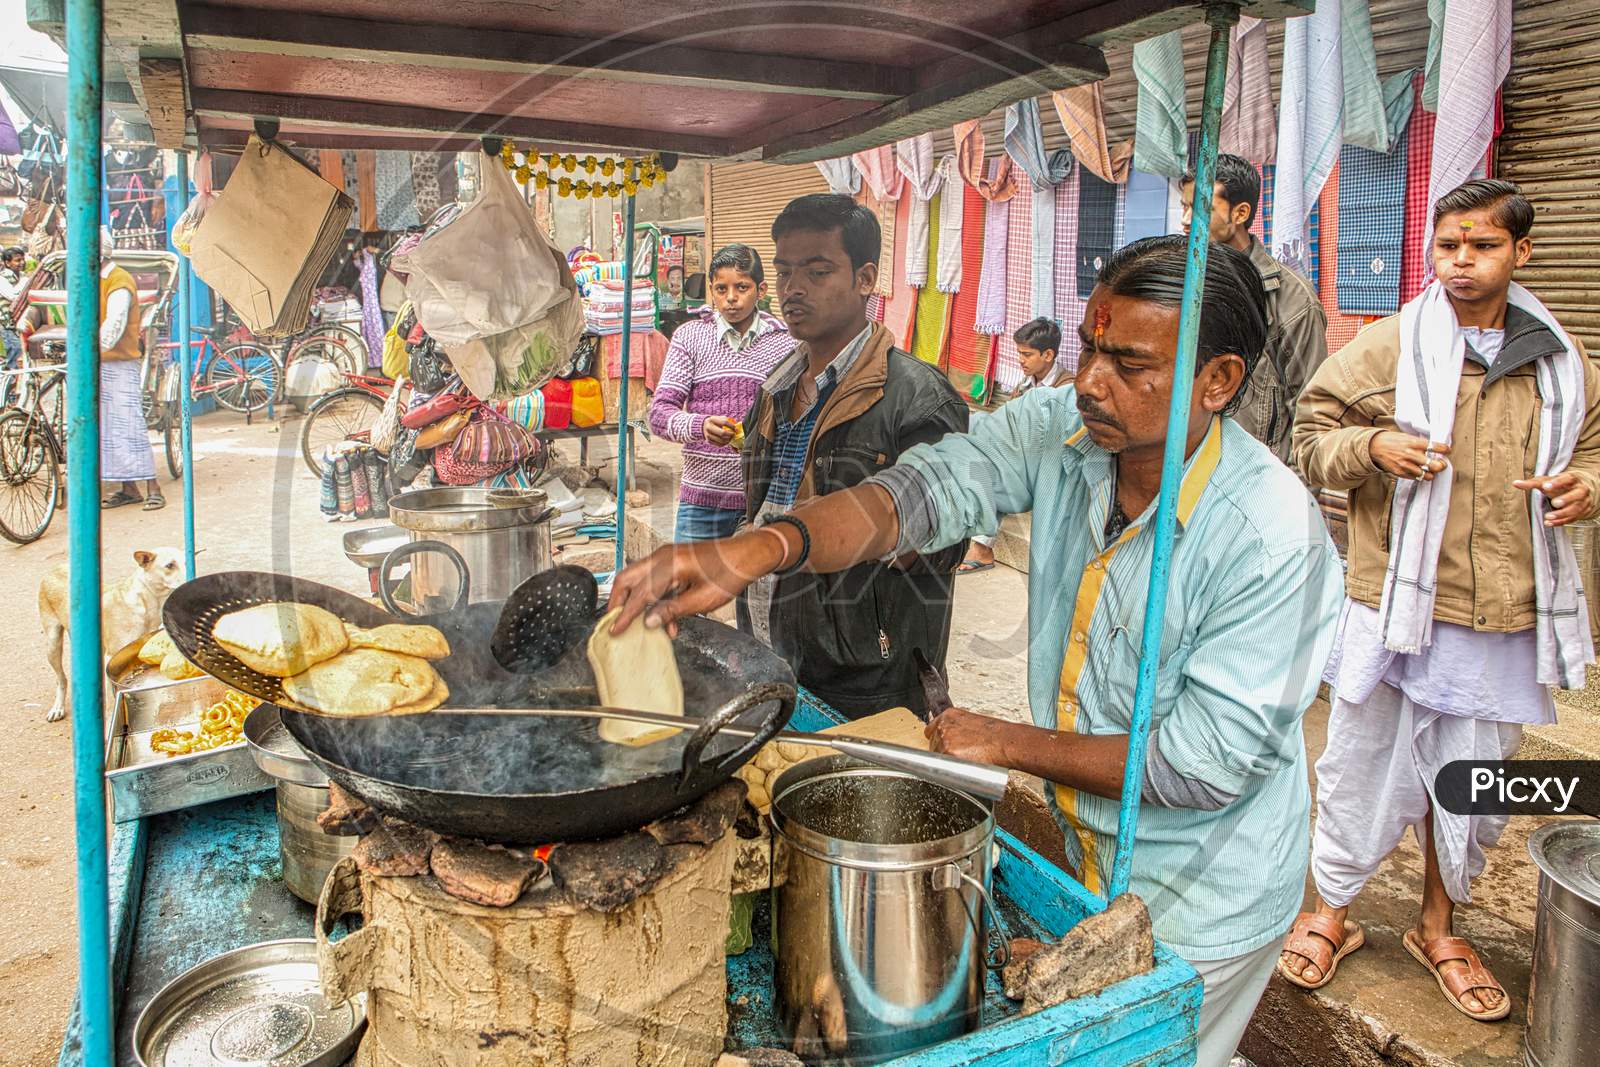 Varanasi, India December 13Th, 2012: Near Dashashwamedh Ghat A Vendor Frying Puri (Also Spelled Poori) Is An Unleavened Deep-Fried Bread And Selling In The Morning.